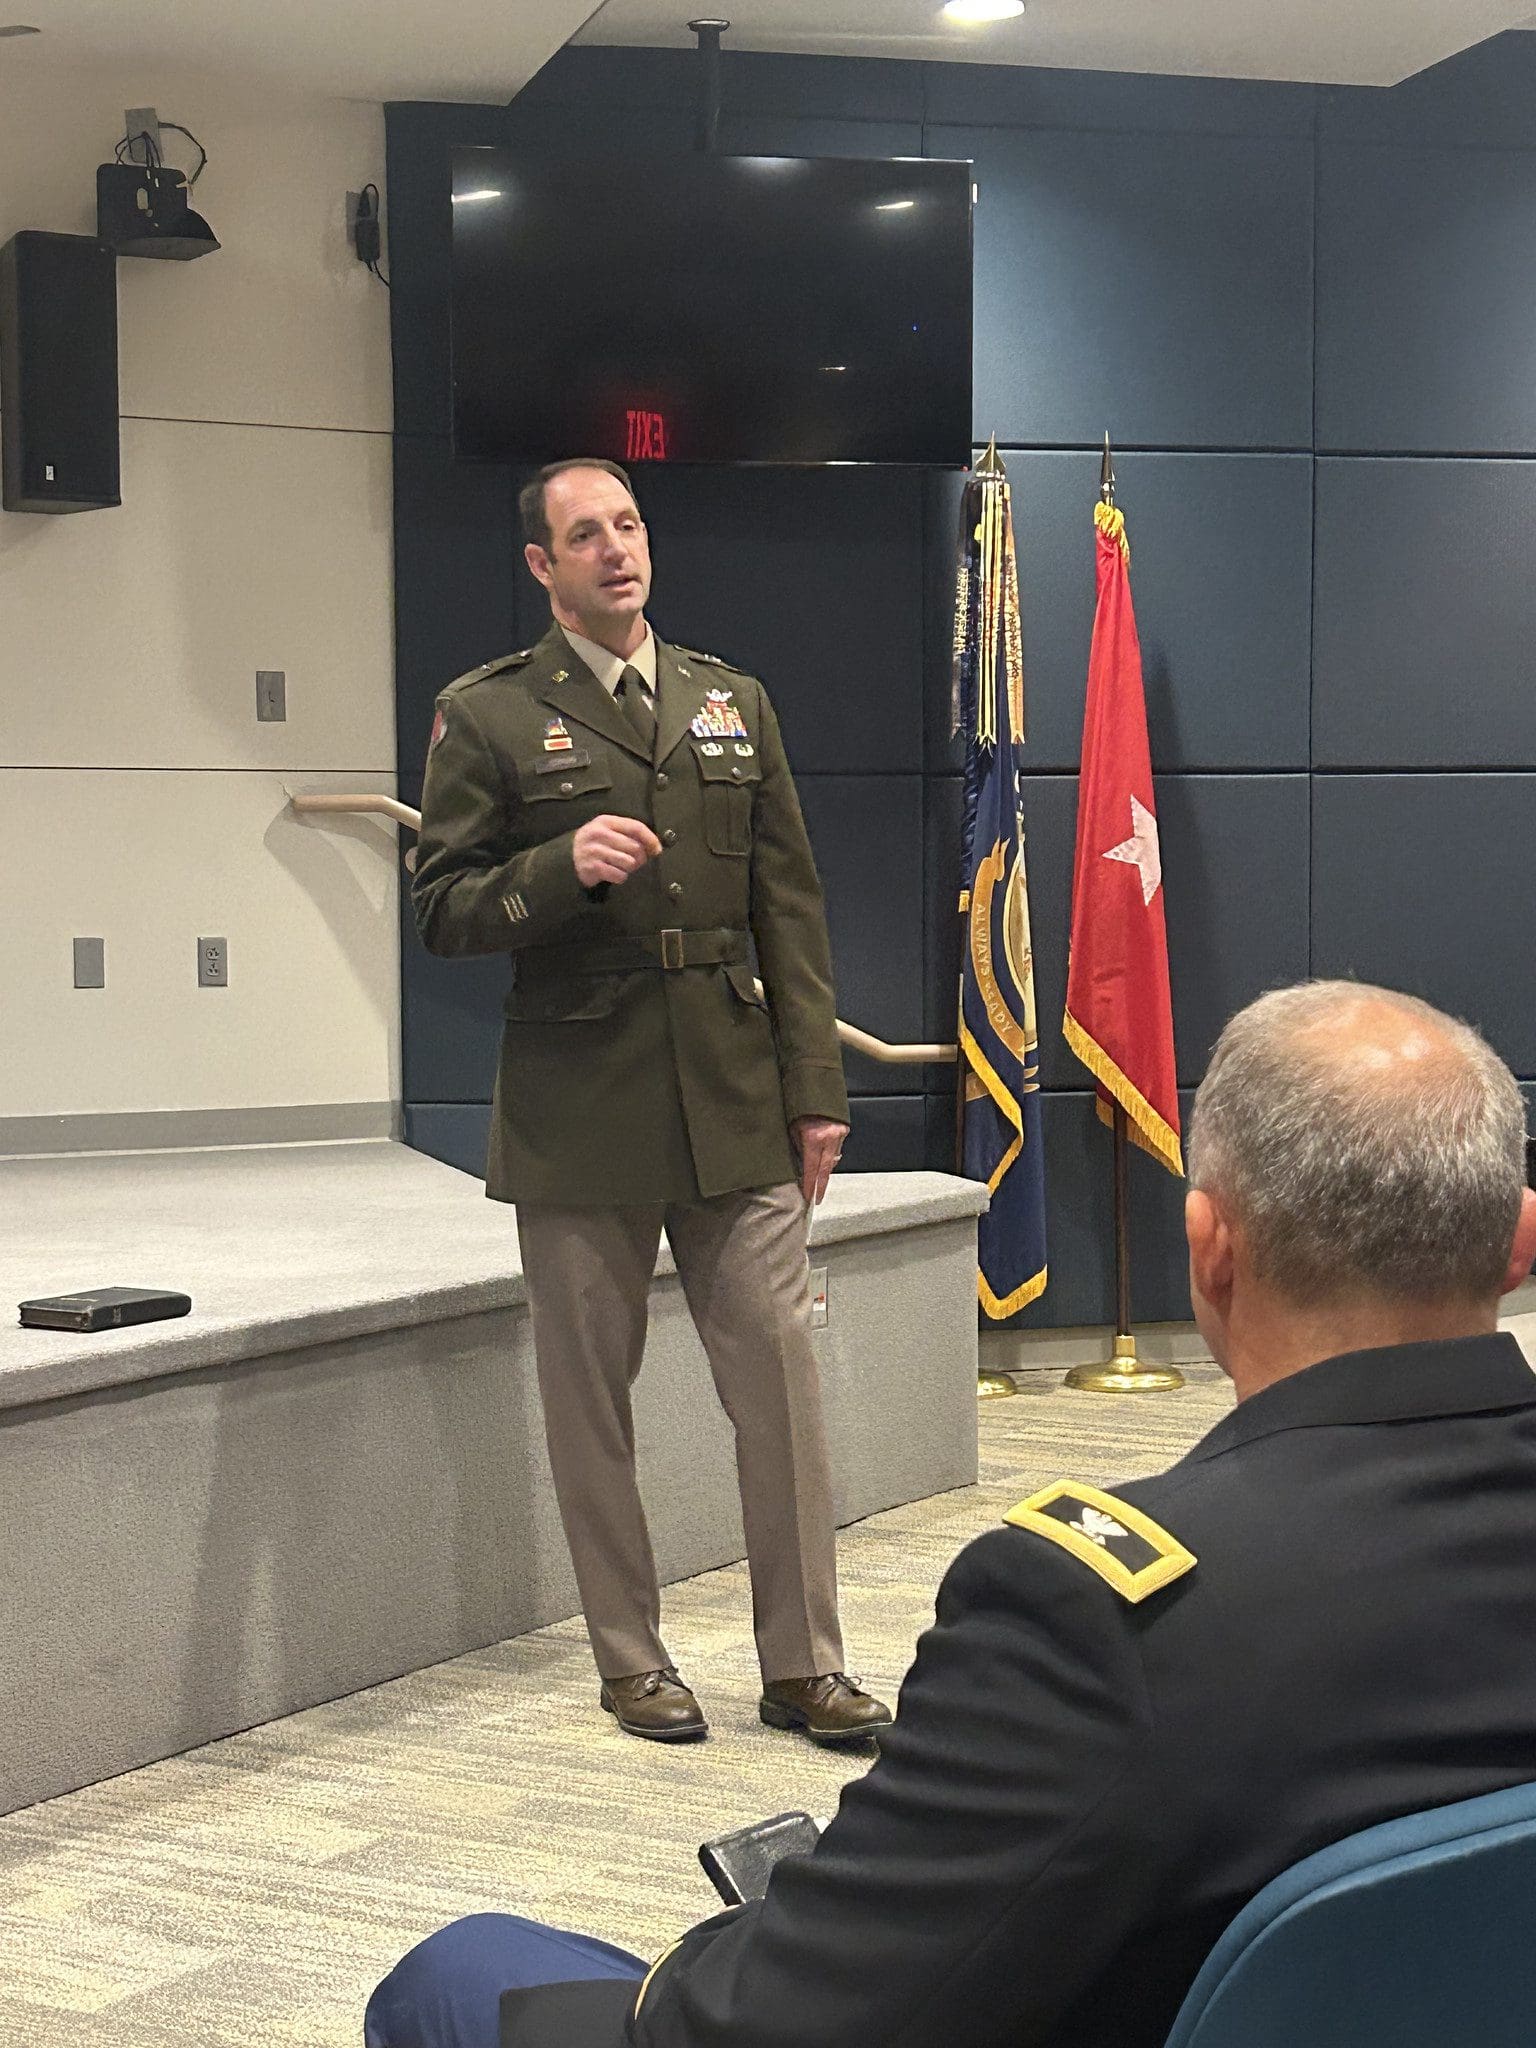 Brig. Gen. Matthew Strub, Wisconsin’s deputy adjutant general for Army, speaks during a July 12 promotion ceremony for Chief Warrant Officer 5 Charles Mattison at Joint Force Headquarters’ Witmer Hall in Madison, Wis. Wisconsin National Guard photo by Staff Sgt. Alice Ripberger